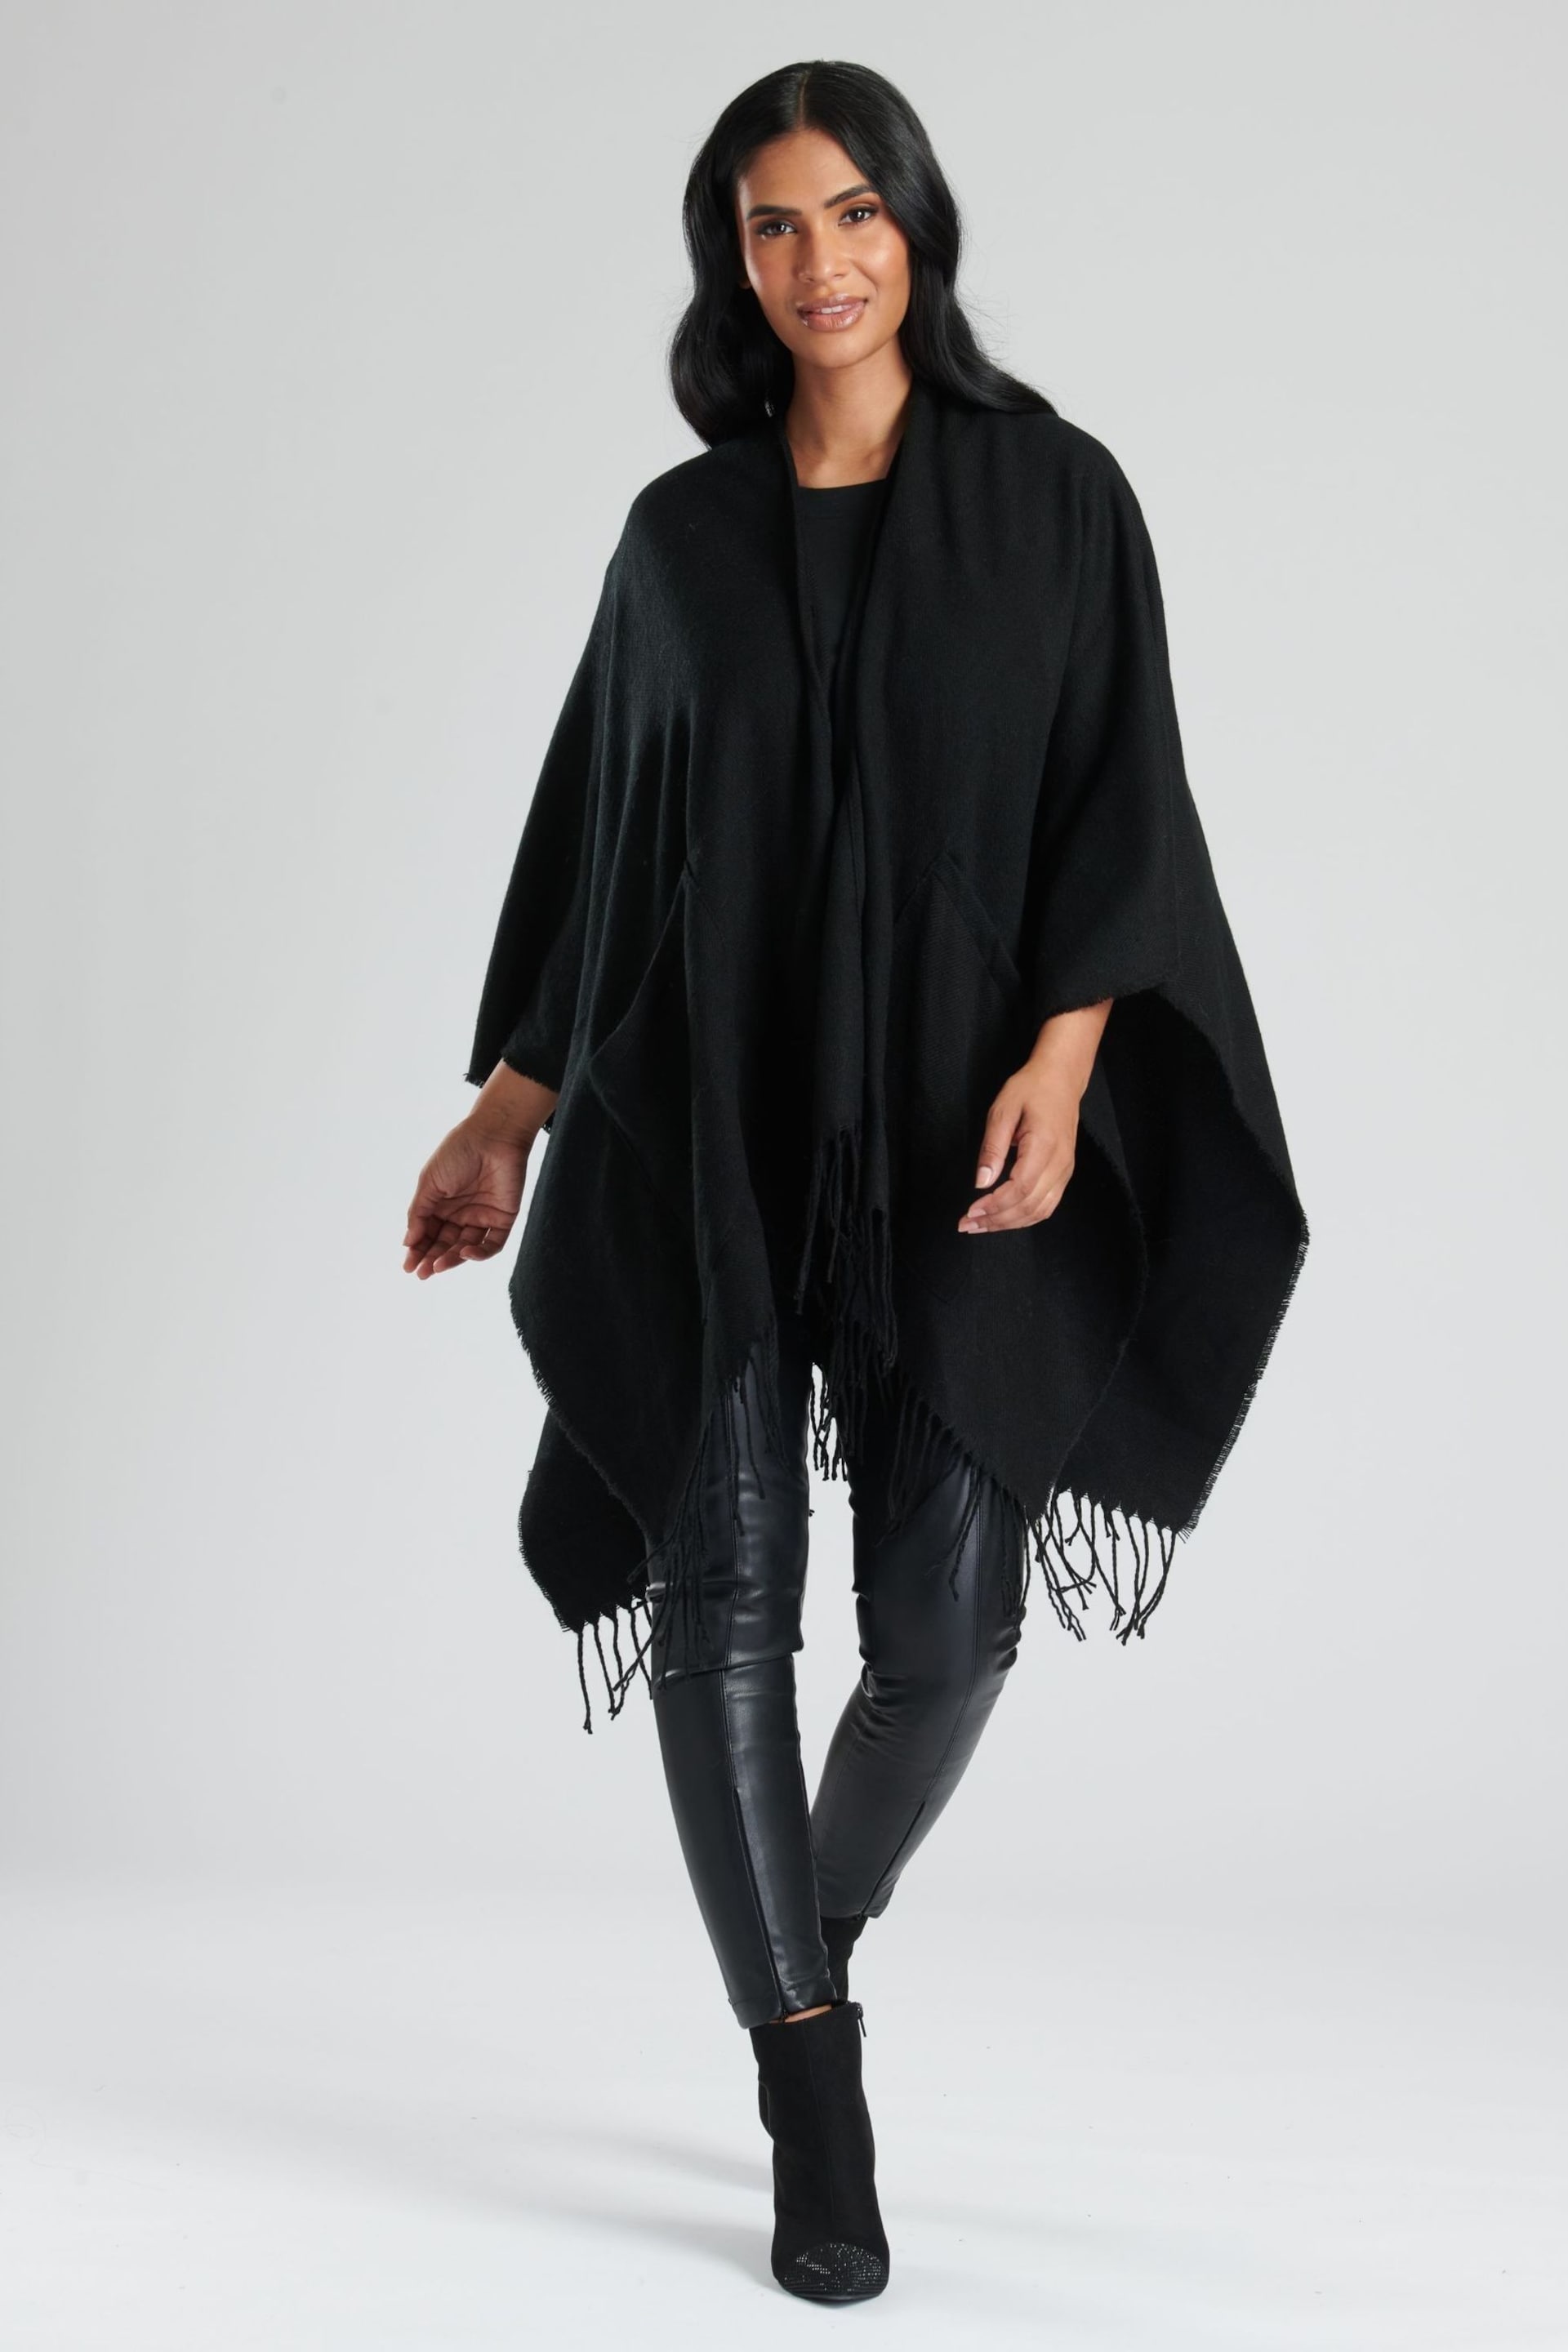 South Beach Black Knitted Fringe Wrap - Image 1 of 5